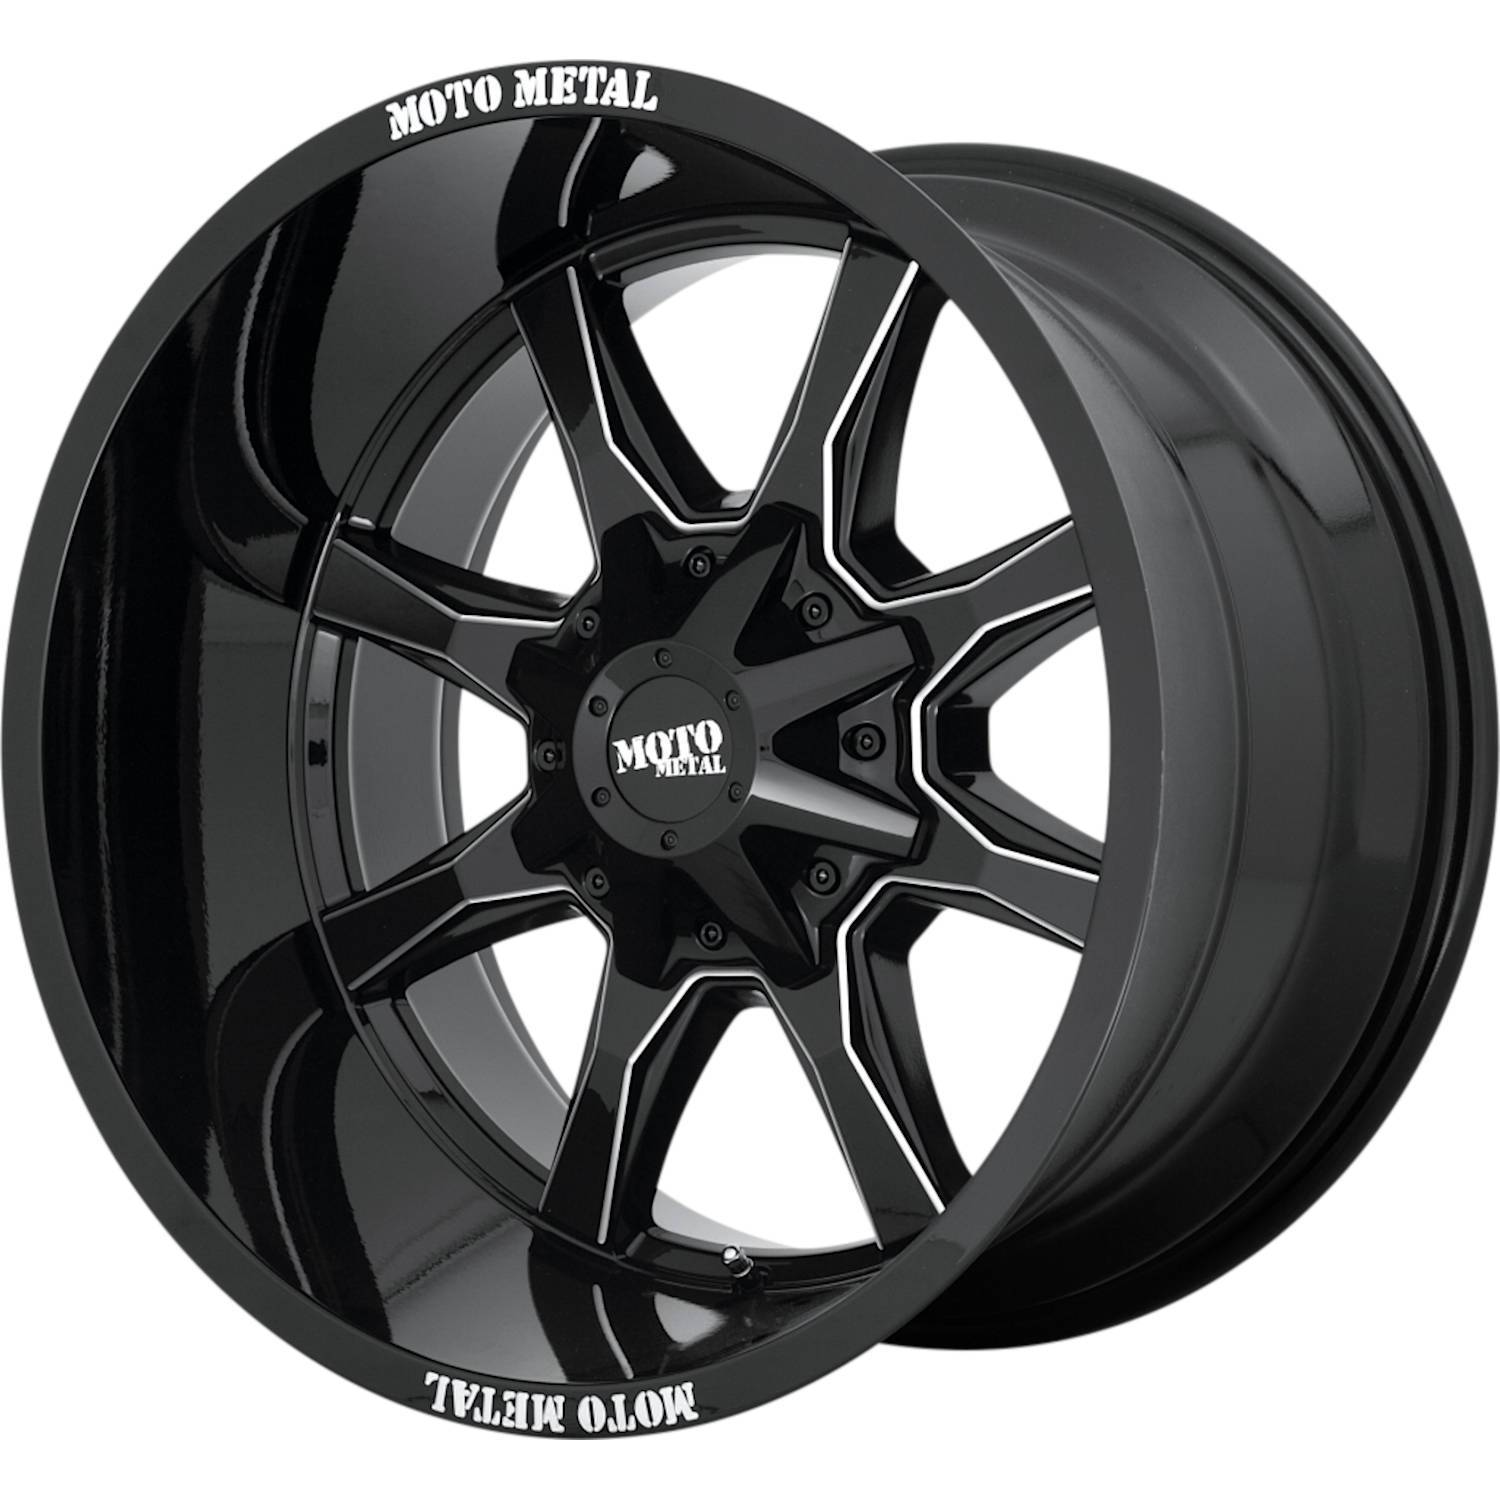 Moto Metal MO970 20x9 0 6x120/6x139.7 (6x5.5) Gloss Black with Milled Spoke Edges - Tires and Engine Performance